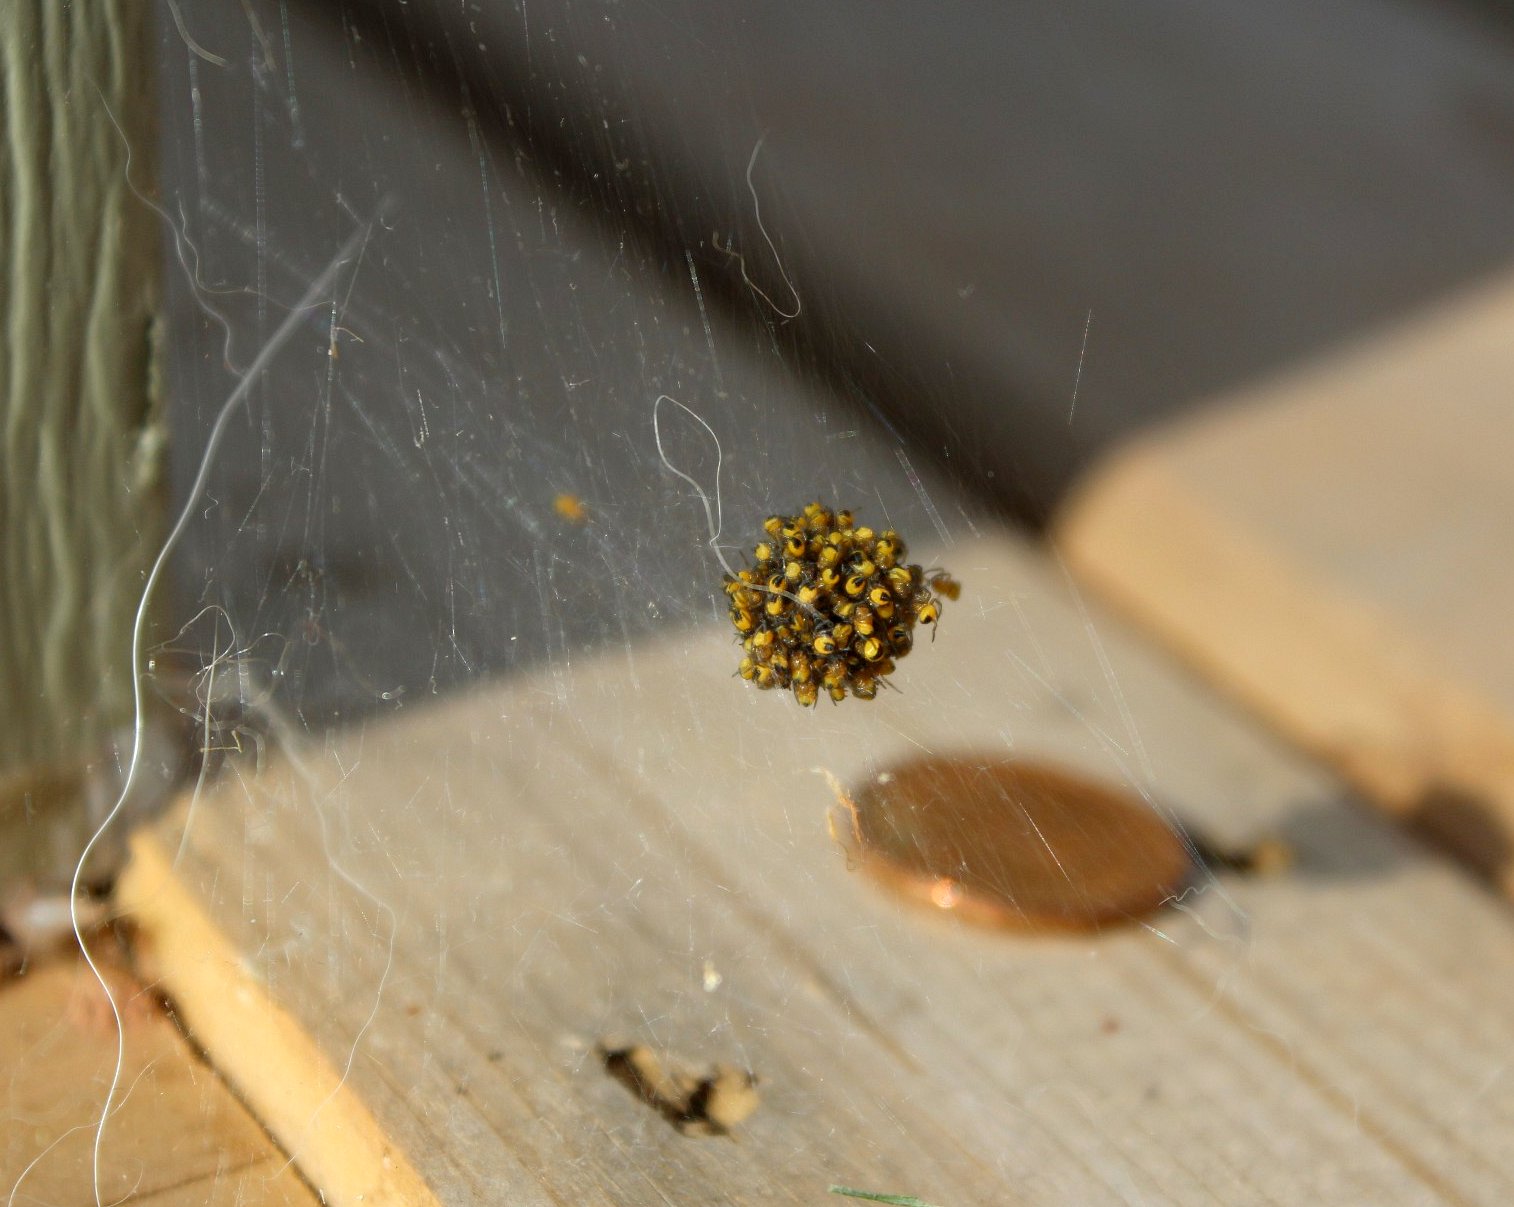 Baby Spiders!